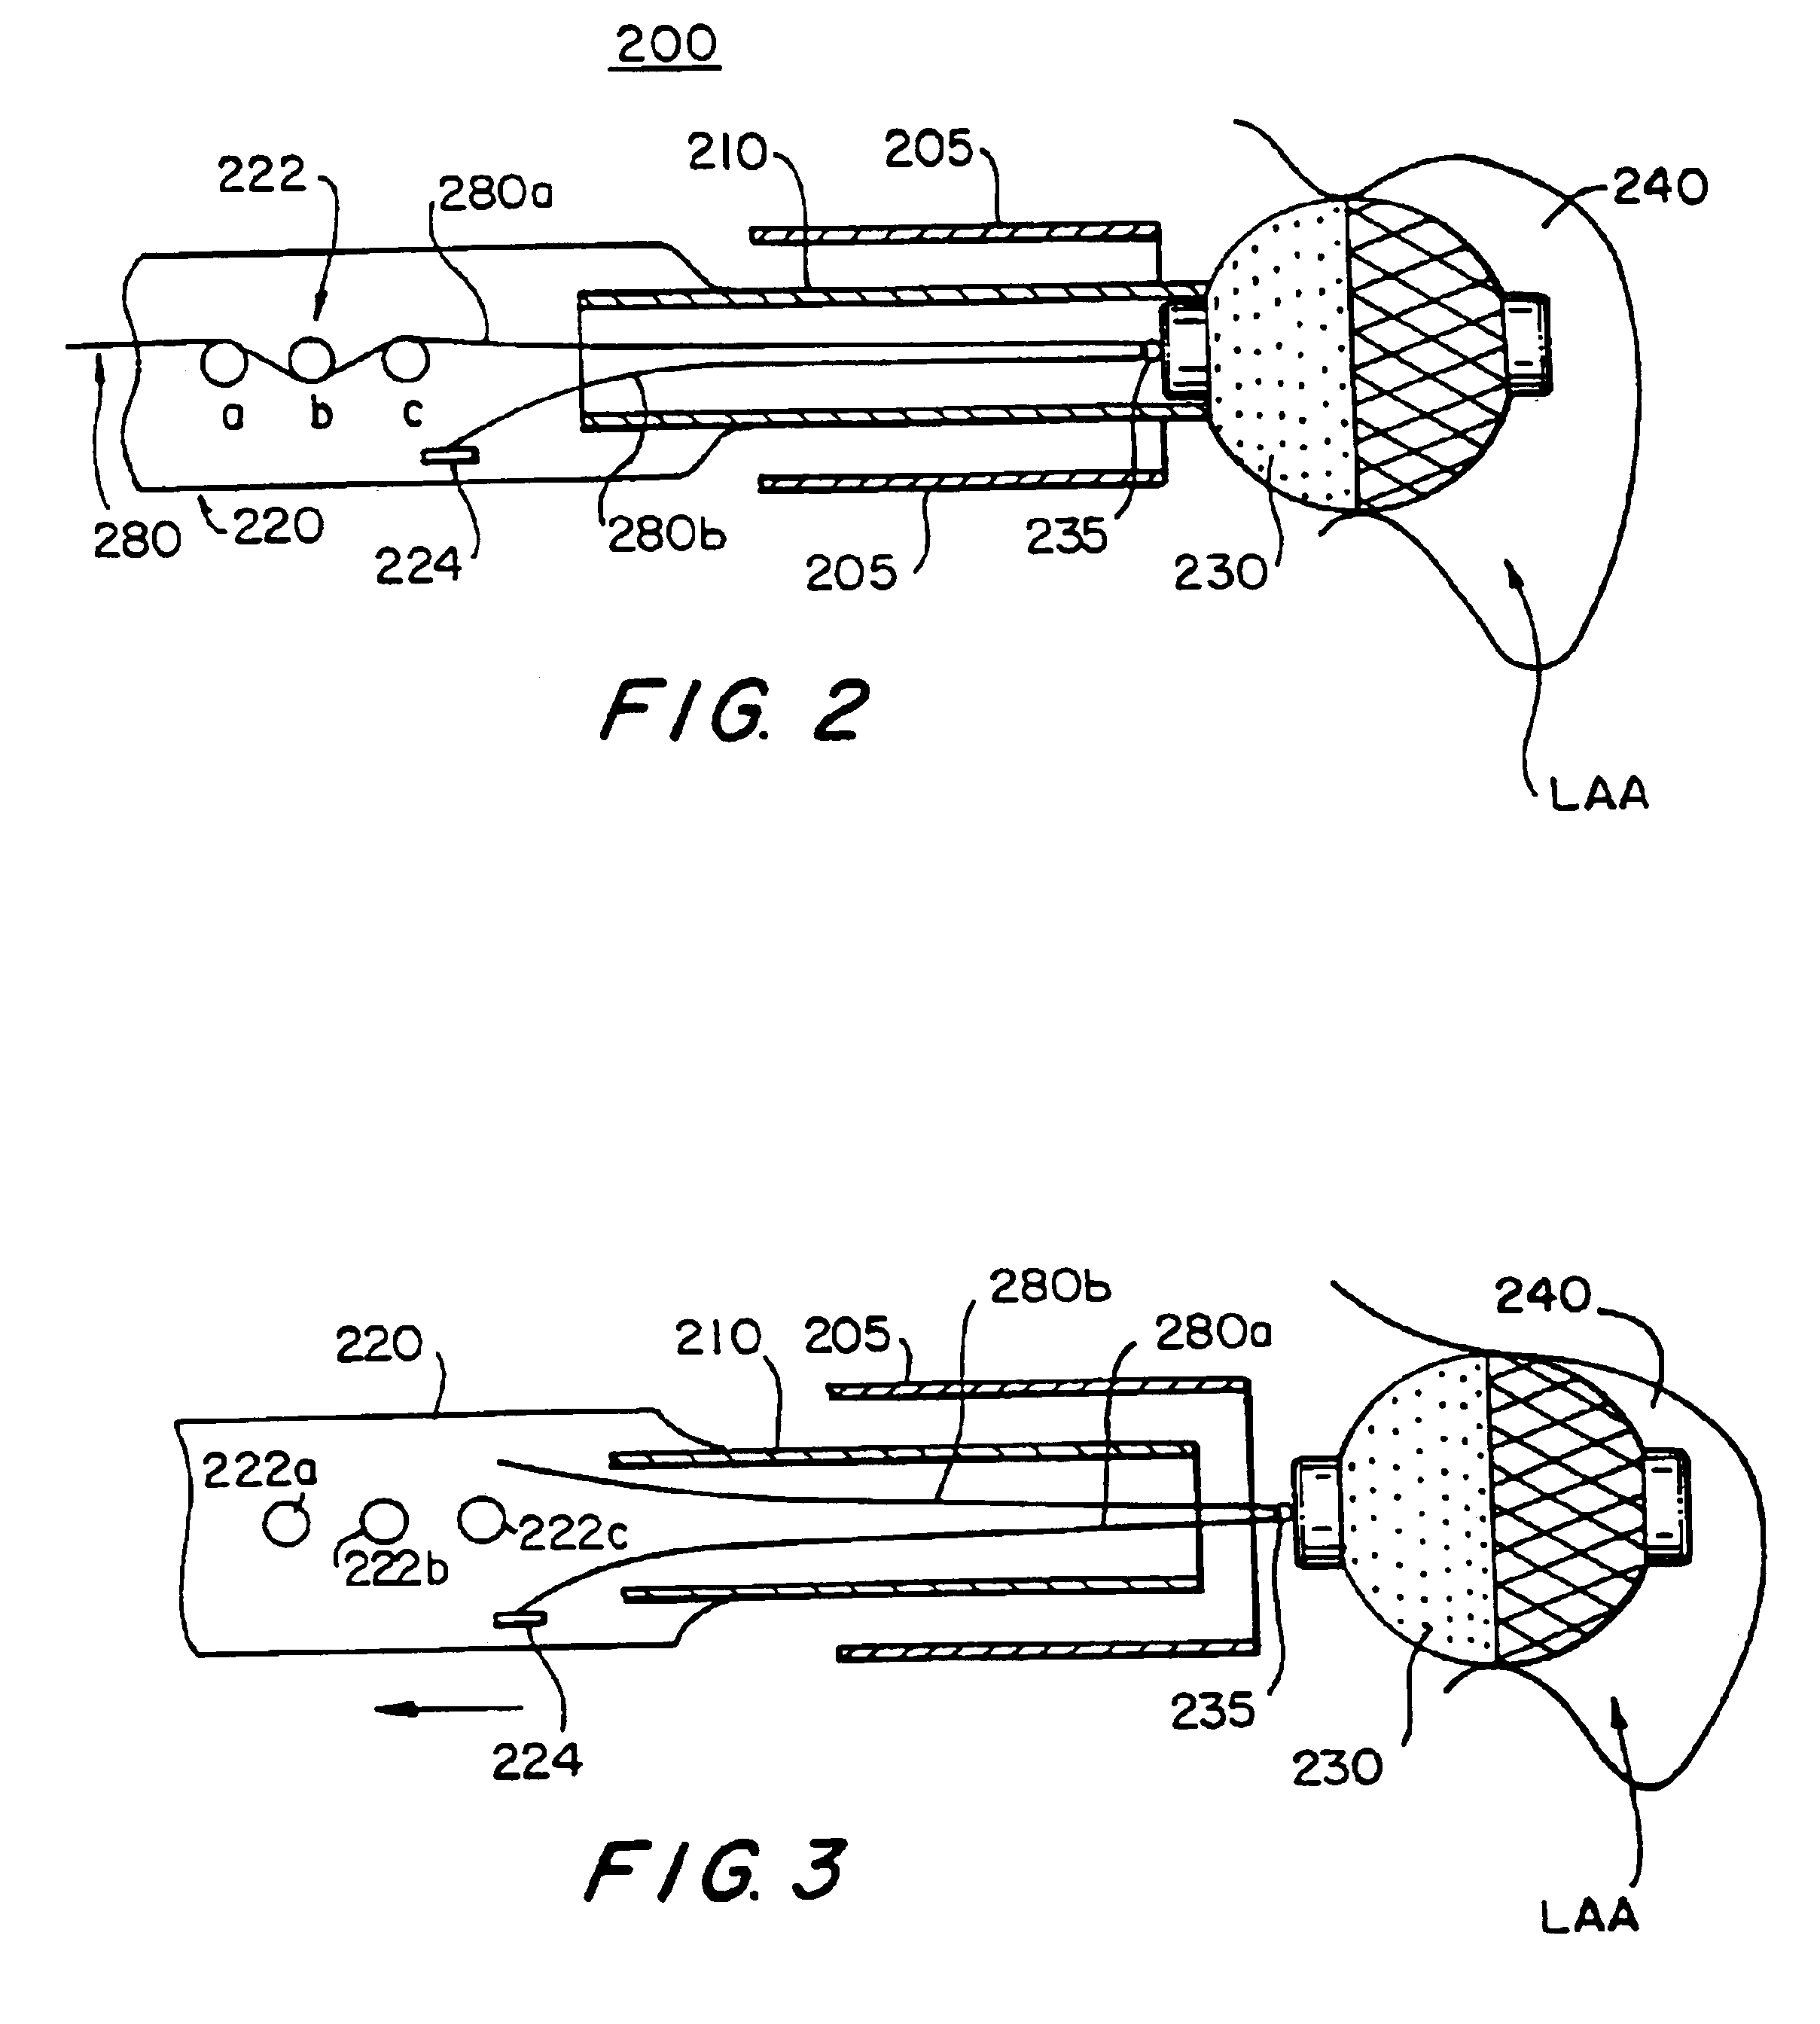 Cardiac implant device tether system and method